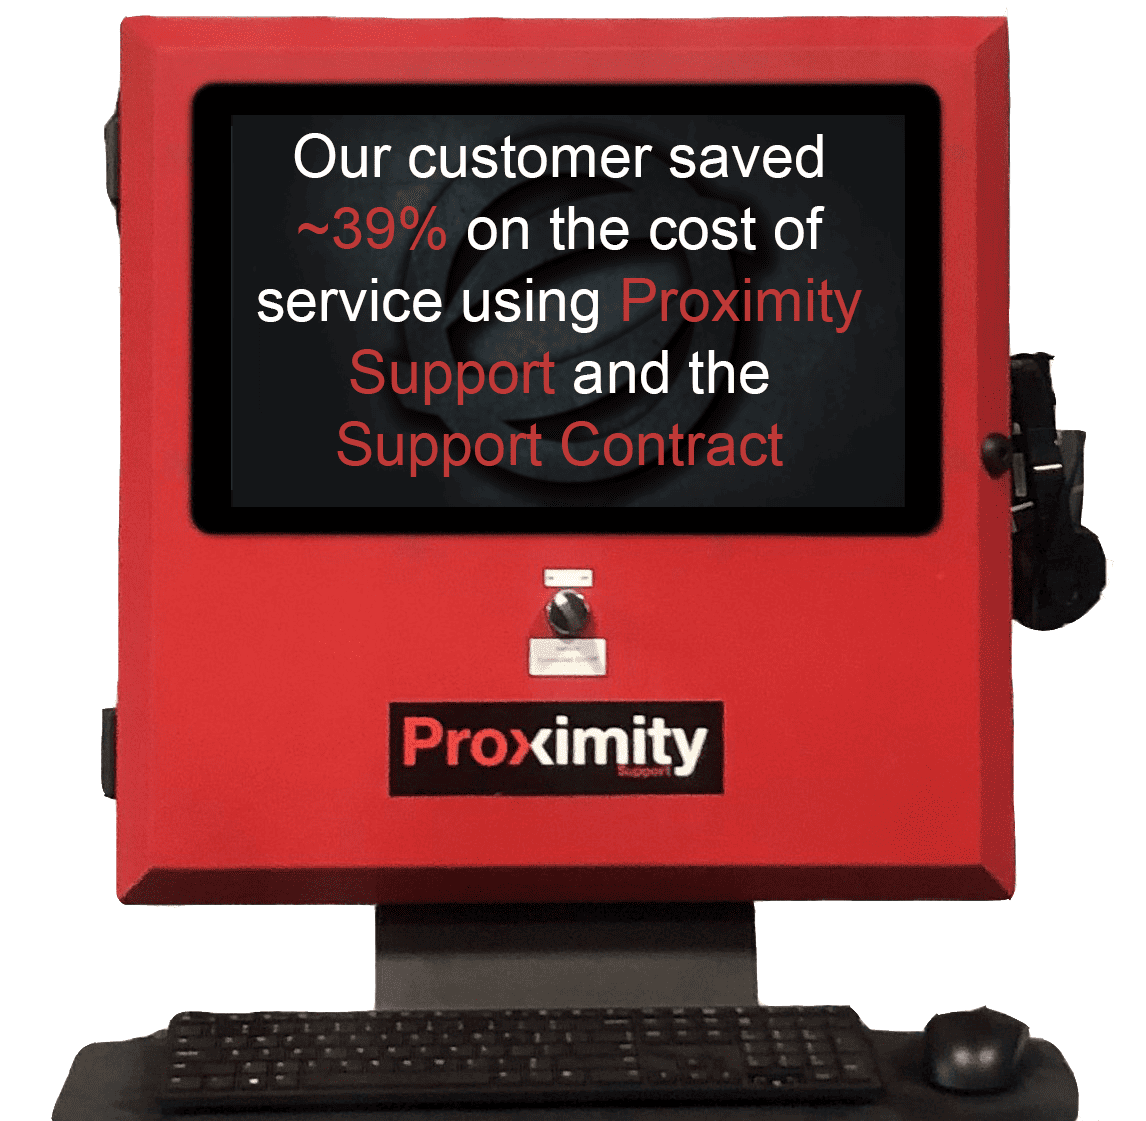 Proximity Support panel with text on the screen reading, "Our customer saved ~39% on the cost of service using Proximity Support and the Support Contract."